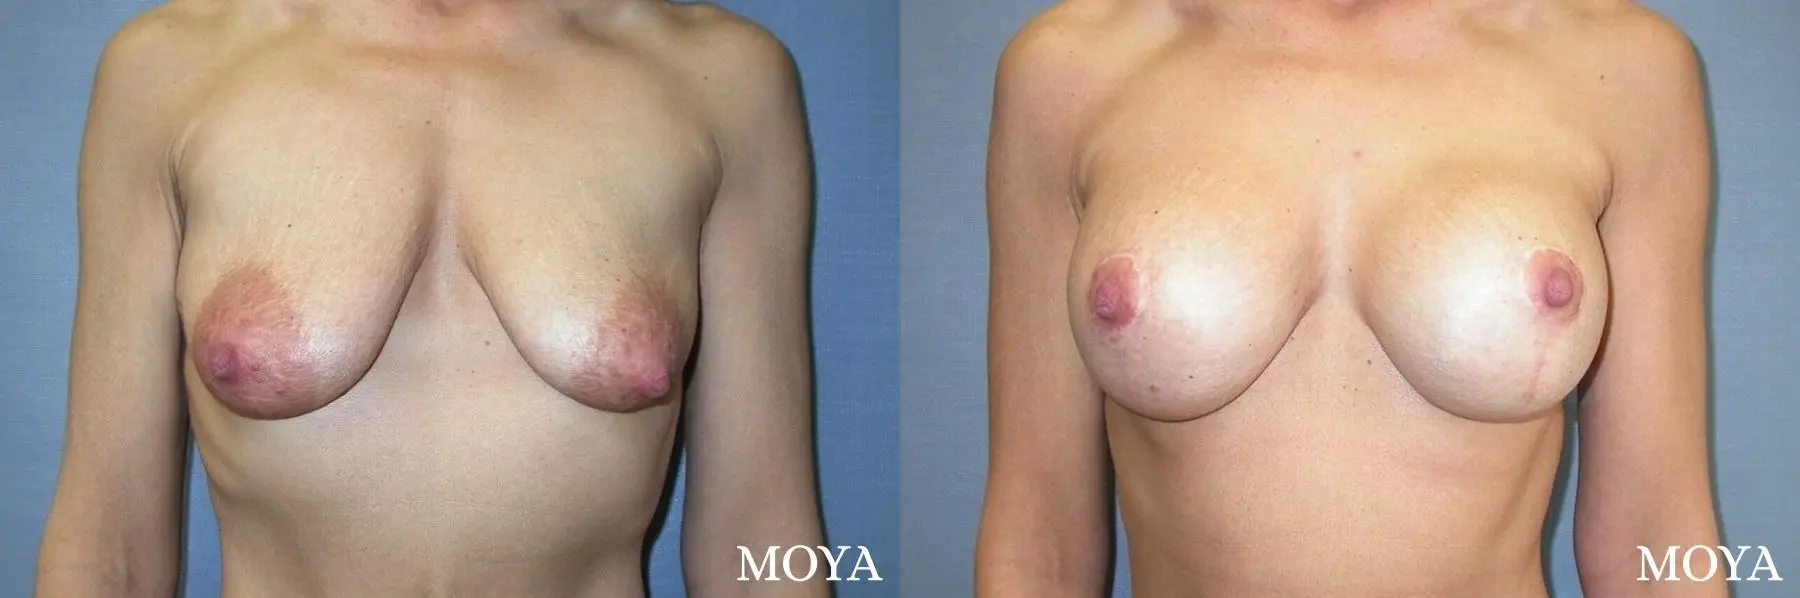 Breast Augmentation With Lift: Patient 4 - Before and After  